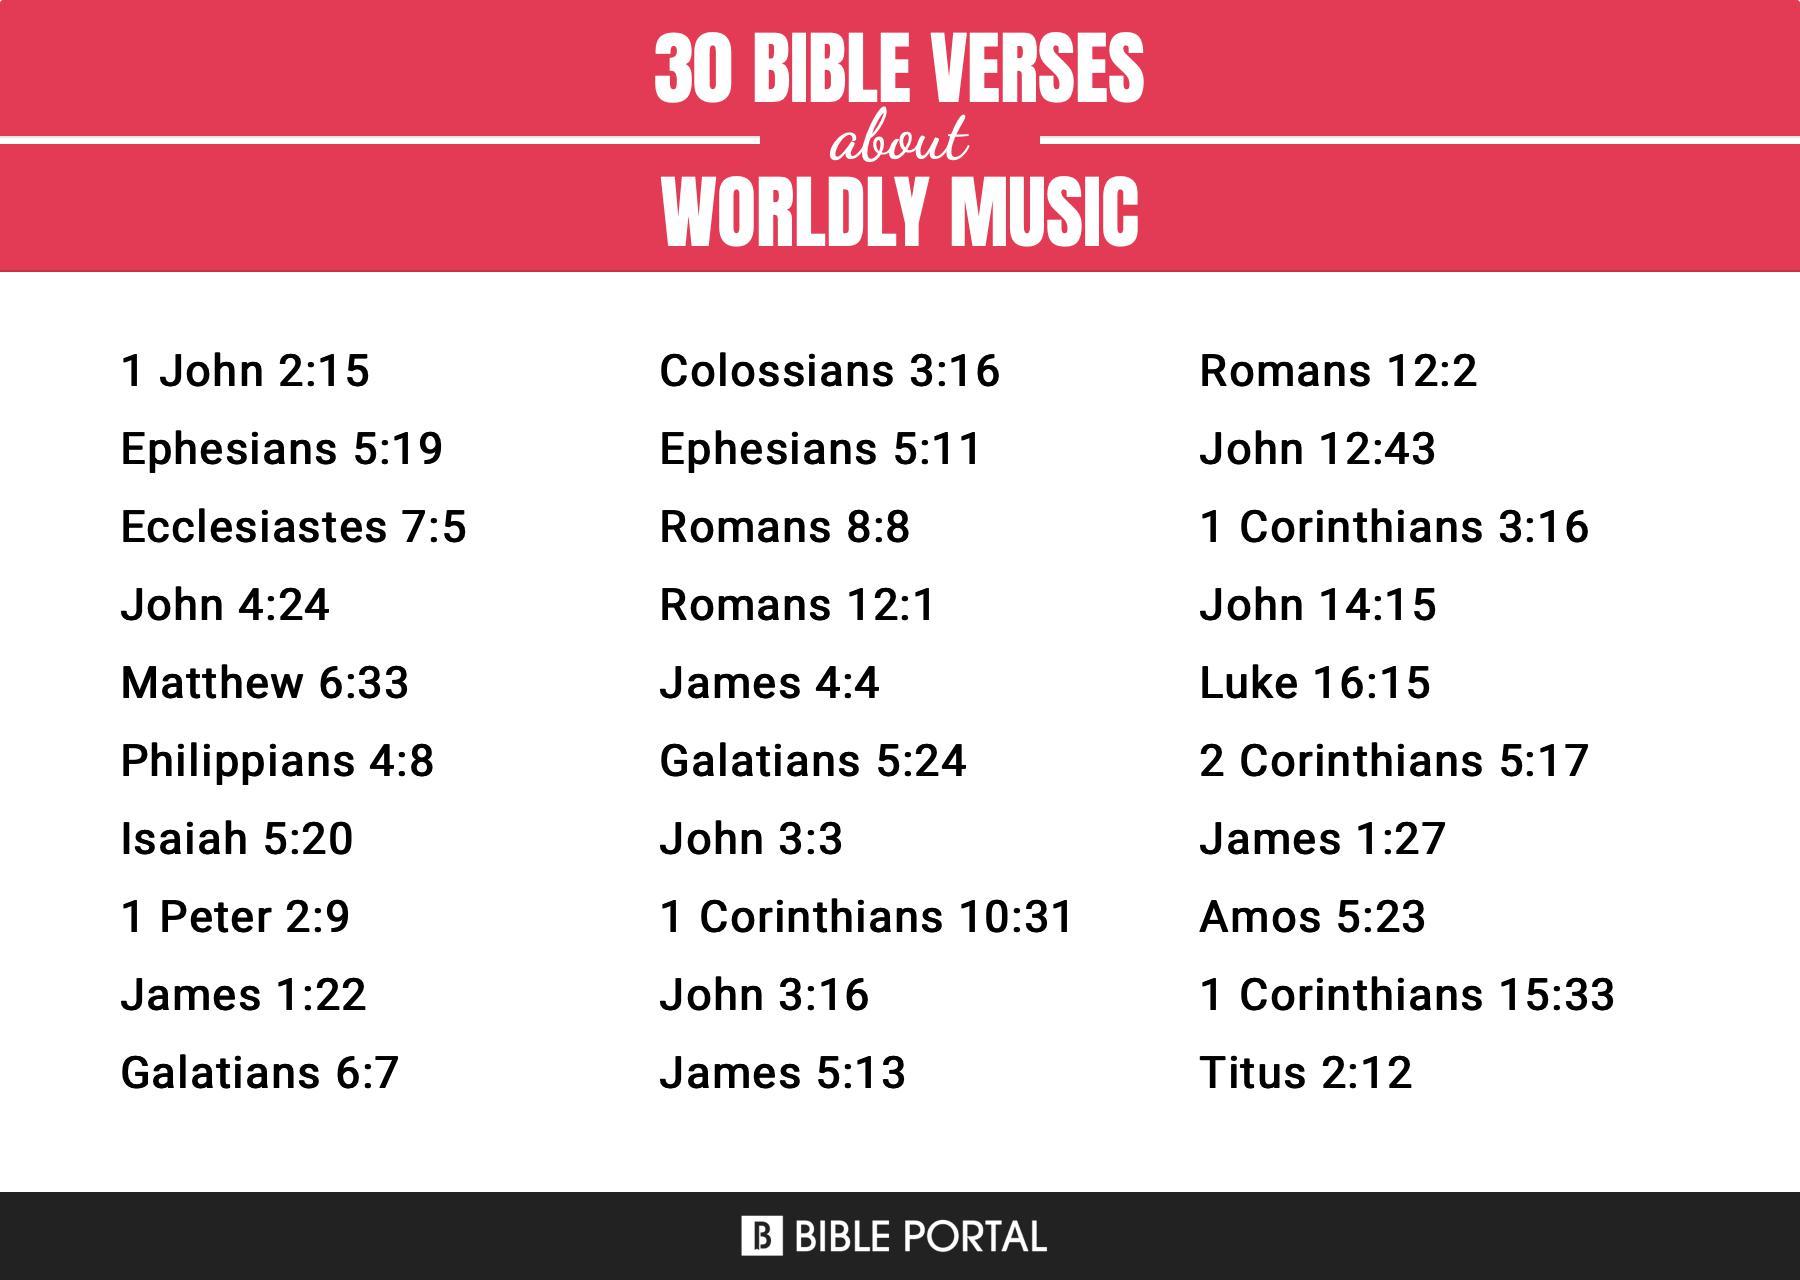 What Does the Bible Say about Worldly Music?